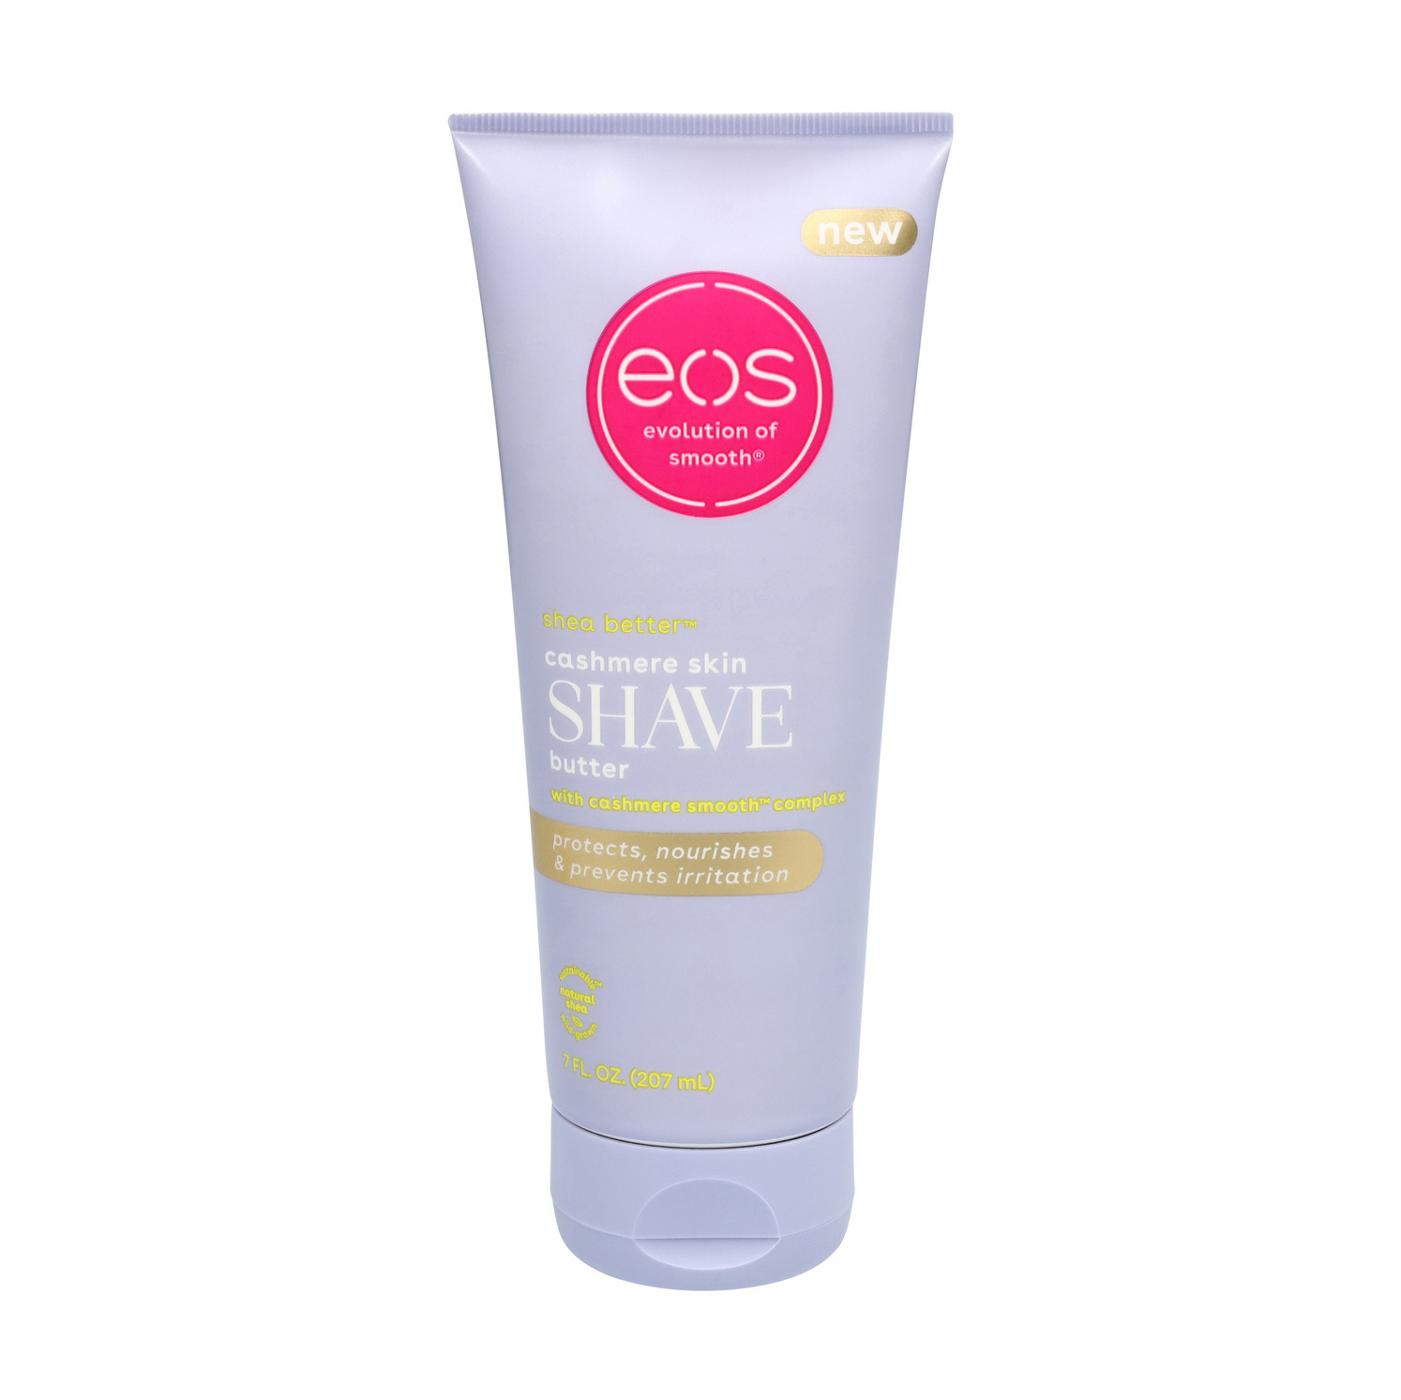 eos Cashmere Skin Shave Butter; image 1 of 2